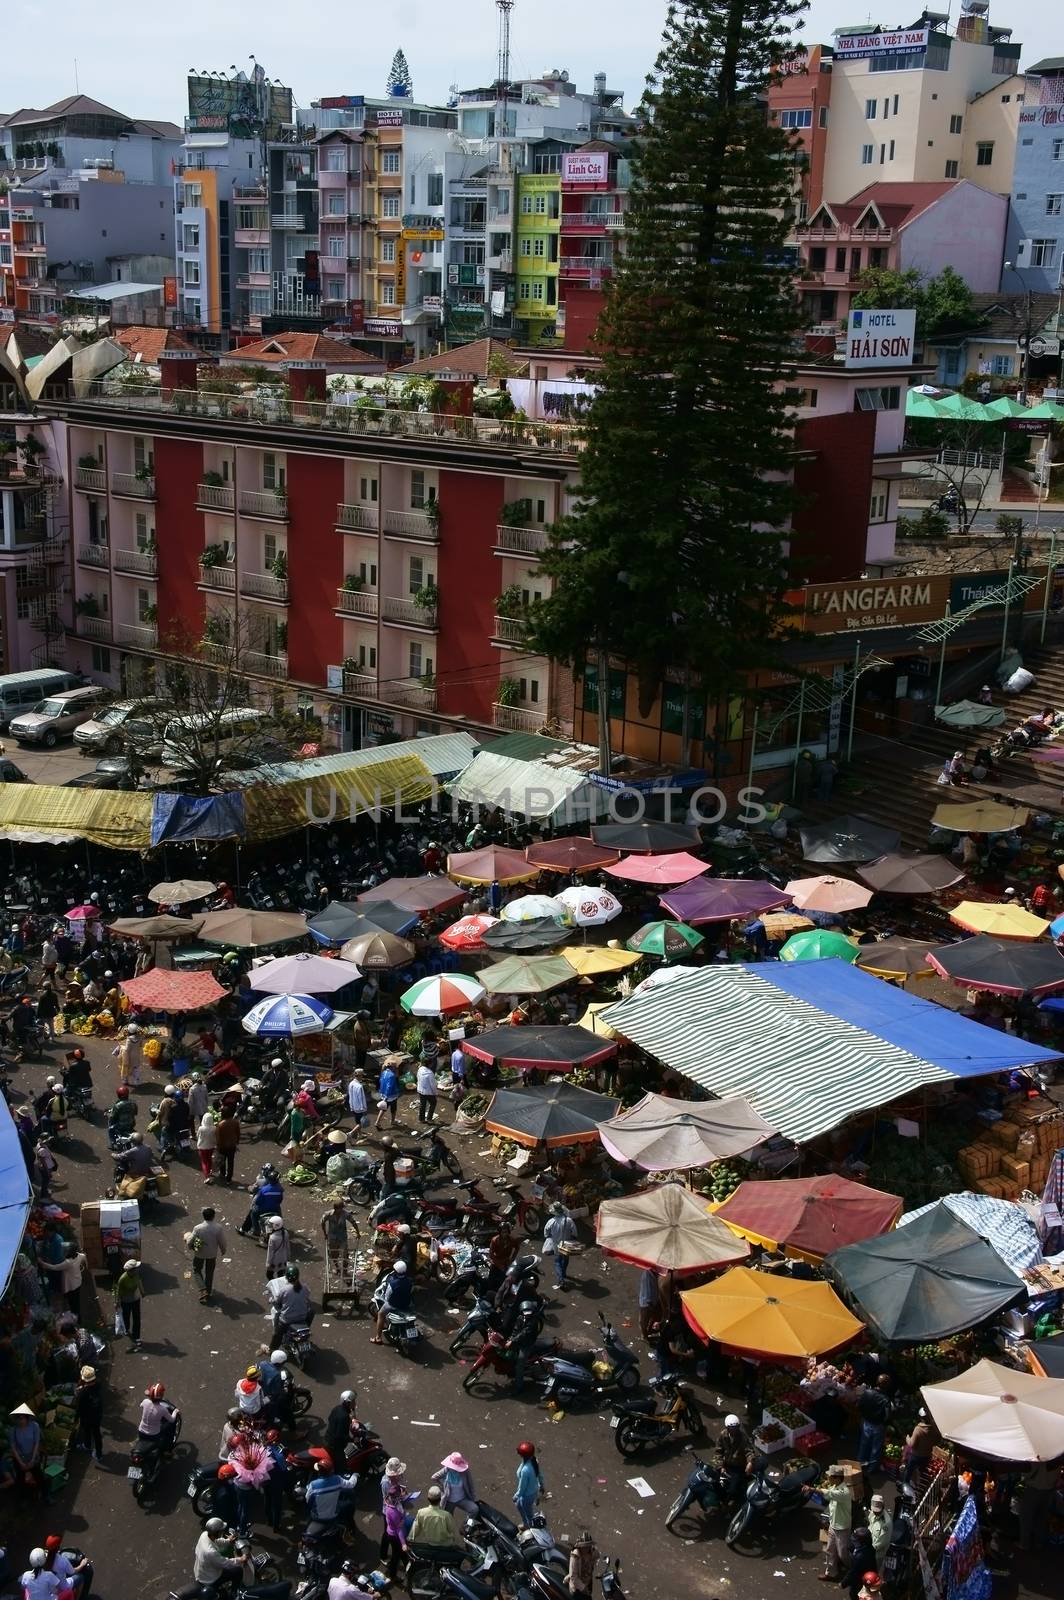 DA LAT, VIET NAM- FEB 8: Crowded, busy scene 's market with crowd of people go to markets to buy goods repair for Tet (Lunar New Year) in Da Lat, Viet Nam on February 8, 2013